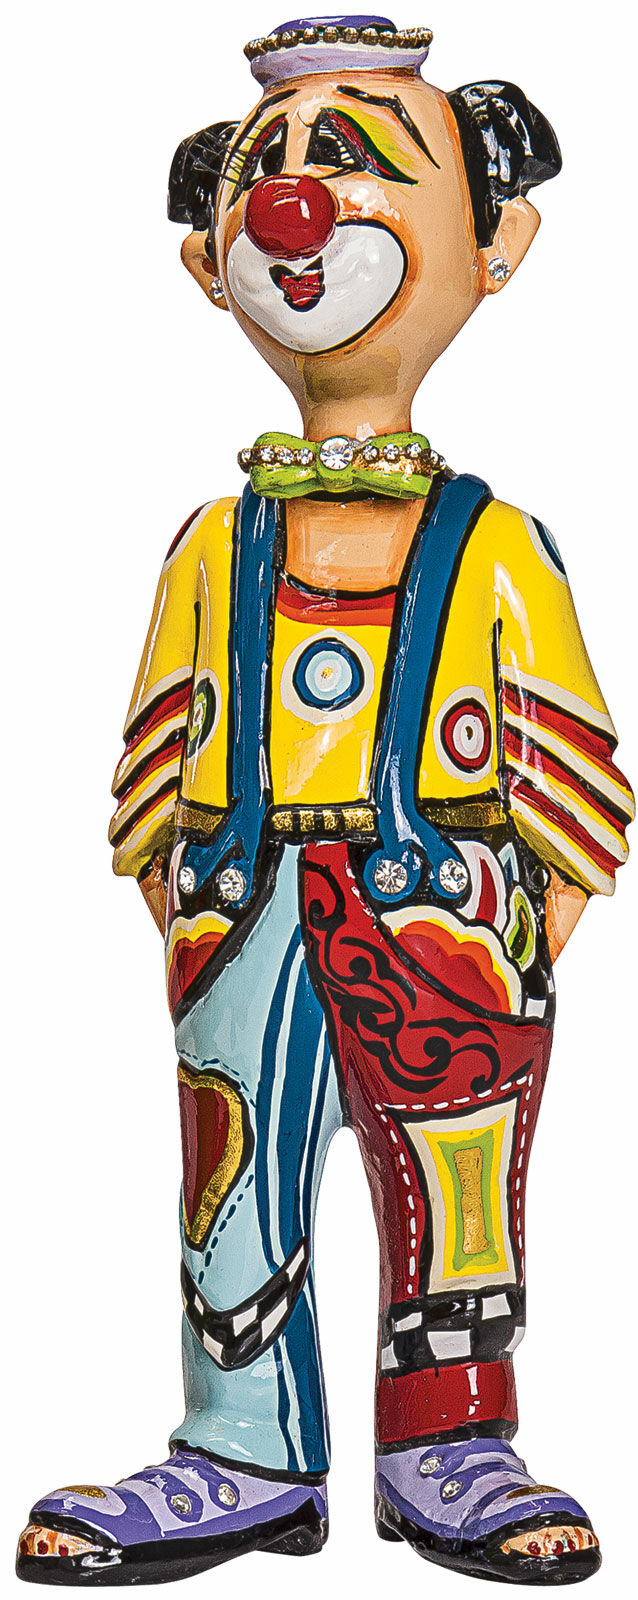 Sculpture "Clown Moretti", hand-painted by Tom's Drag